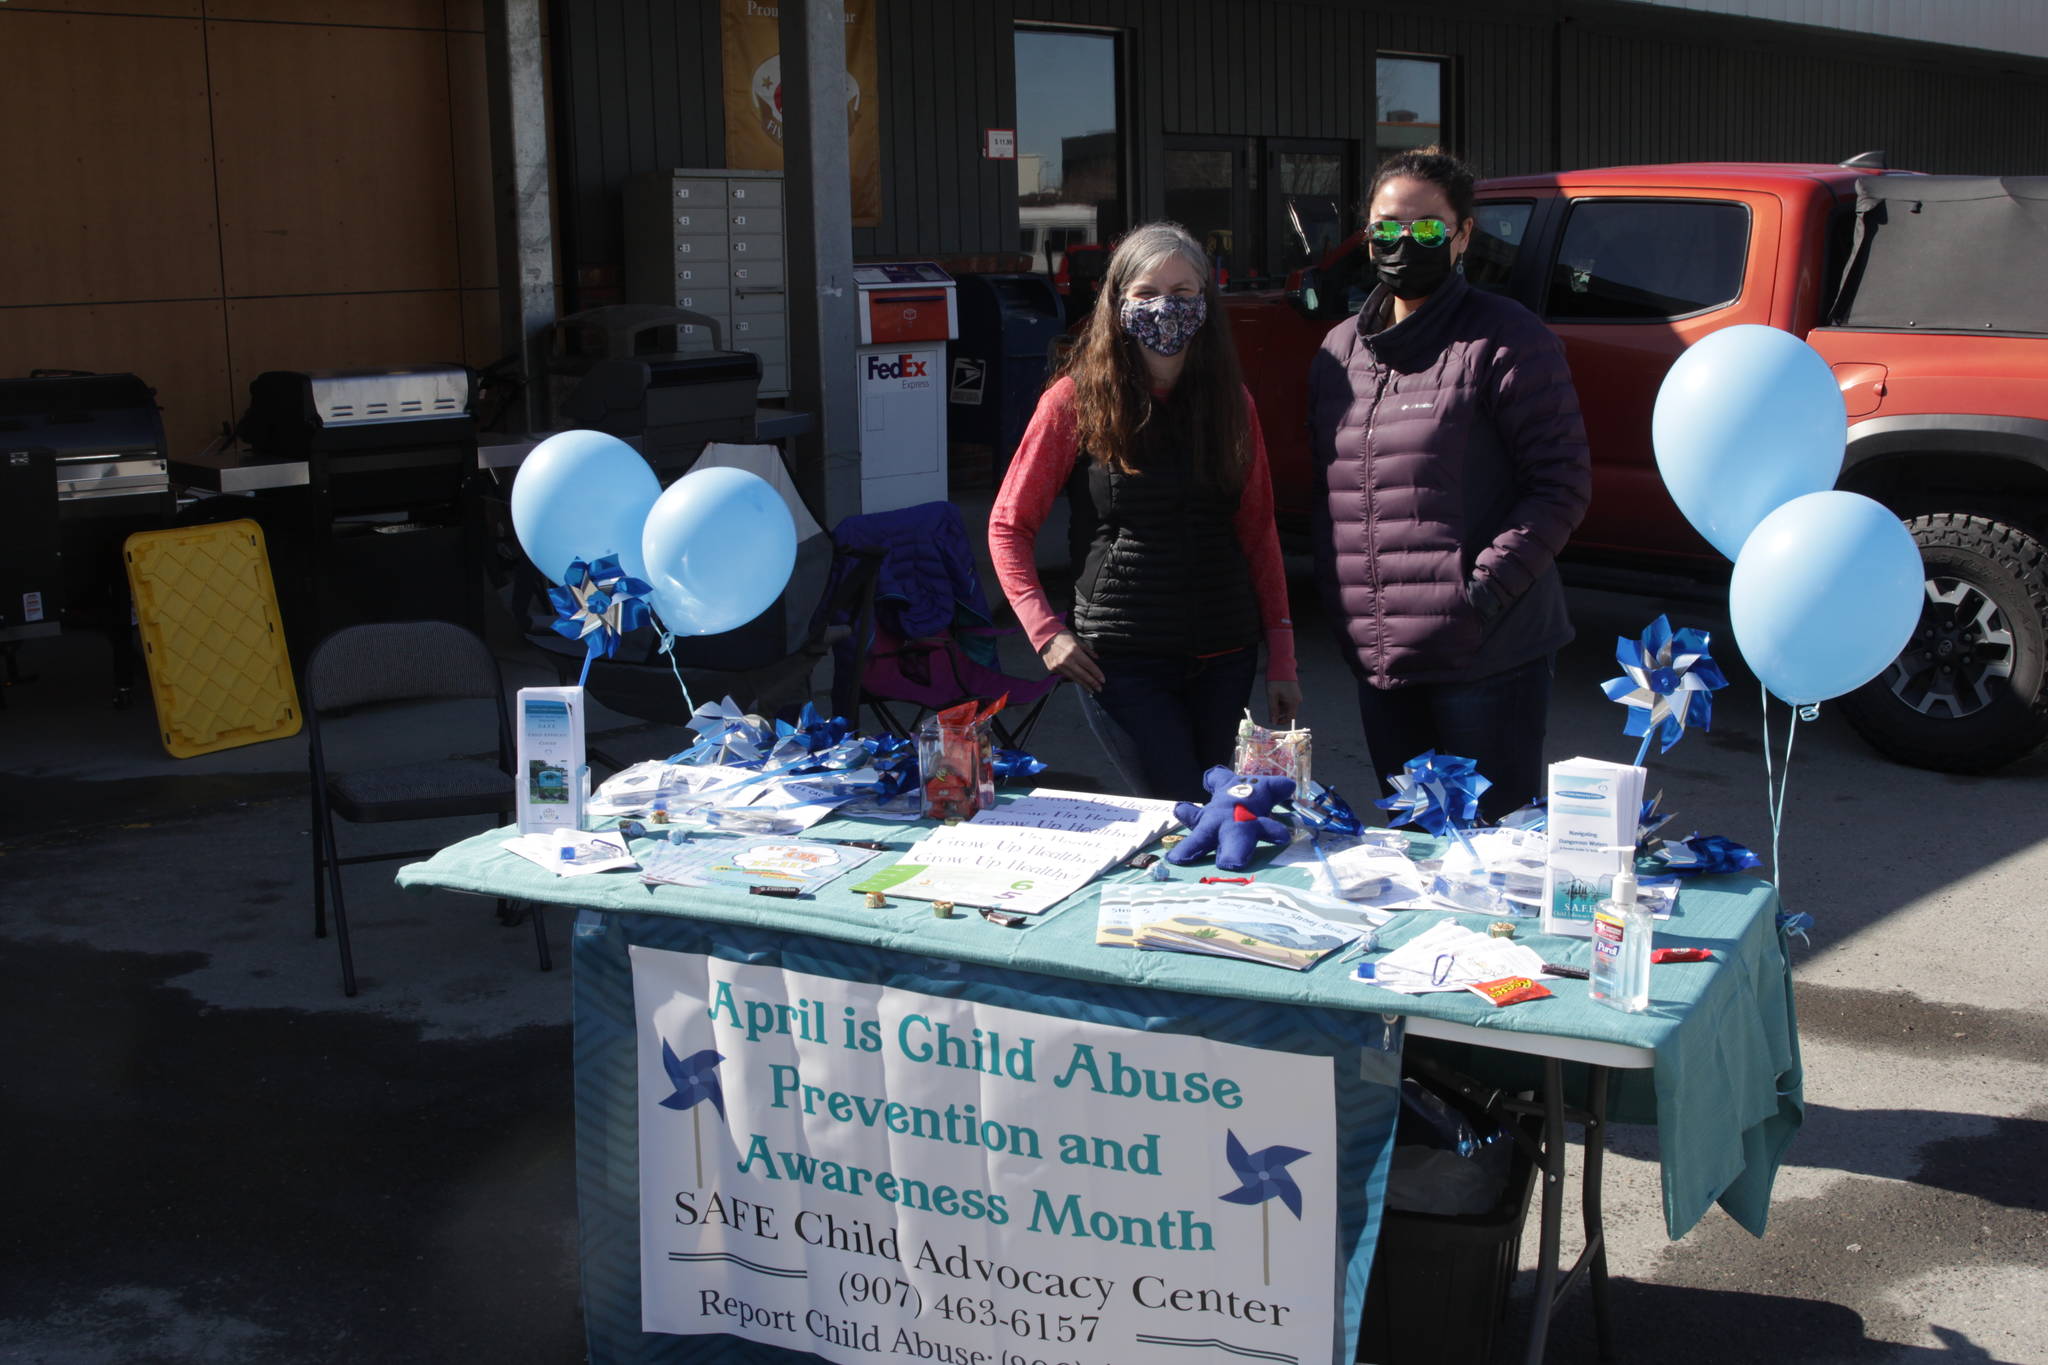 Michael S. Lockett / Juneau Empire 
Susan Moseby, left, SAFE program administrator, and Jenny Farley, a nurse with the child advocacy center, man a table at IGA Foodland for Child Abuse Prevention Awareness month, giving information and resources to those who ask on April 16, 2021.